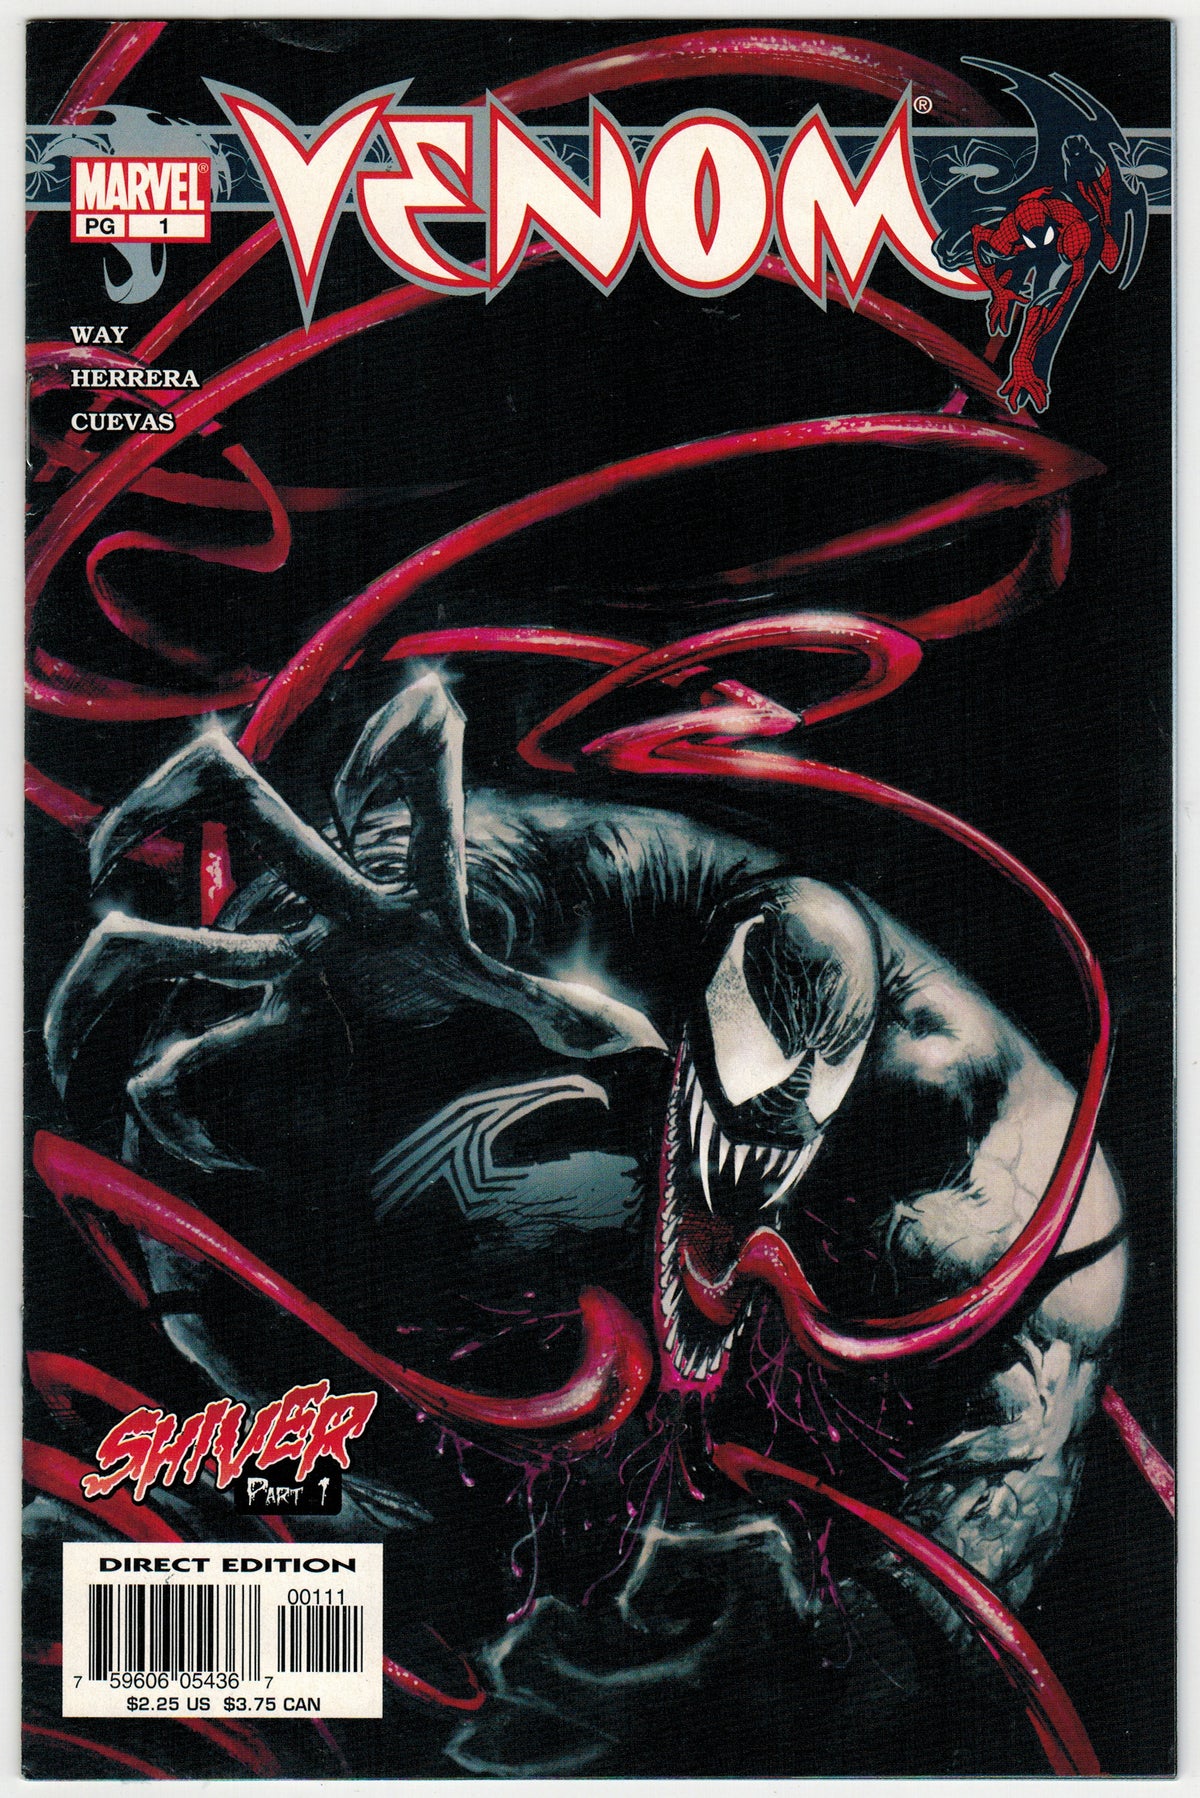 Photo of Venom, Vol. 1 (2003) Issue 1 - Very Fine Comic sold by Stronghold Collectibles